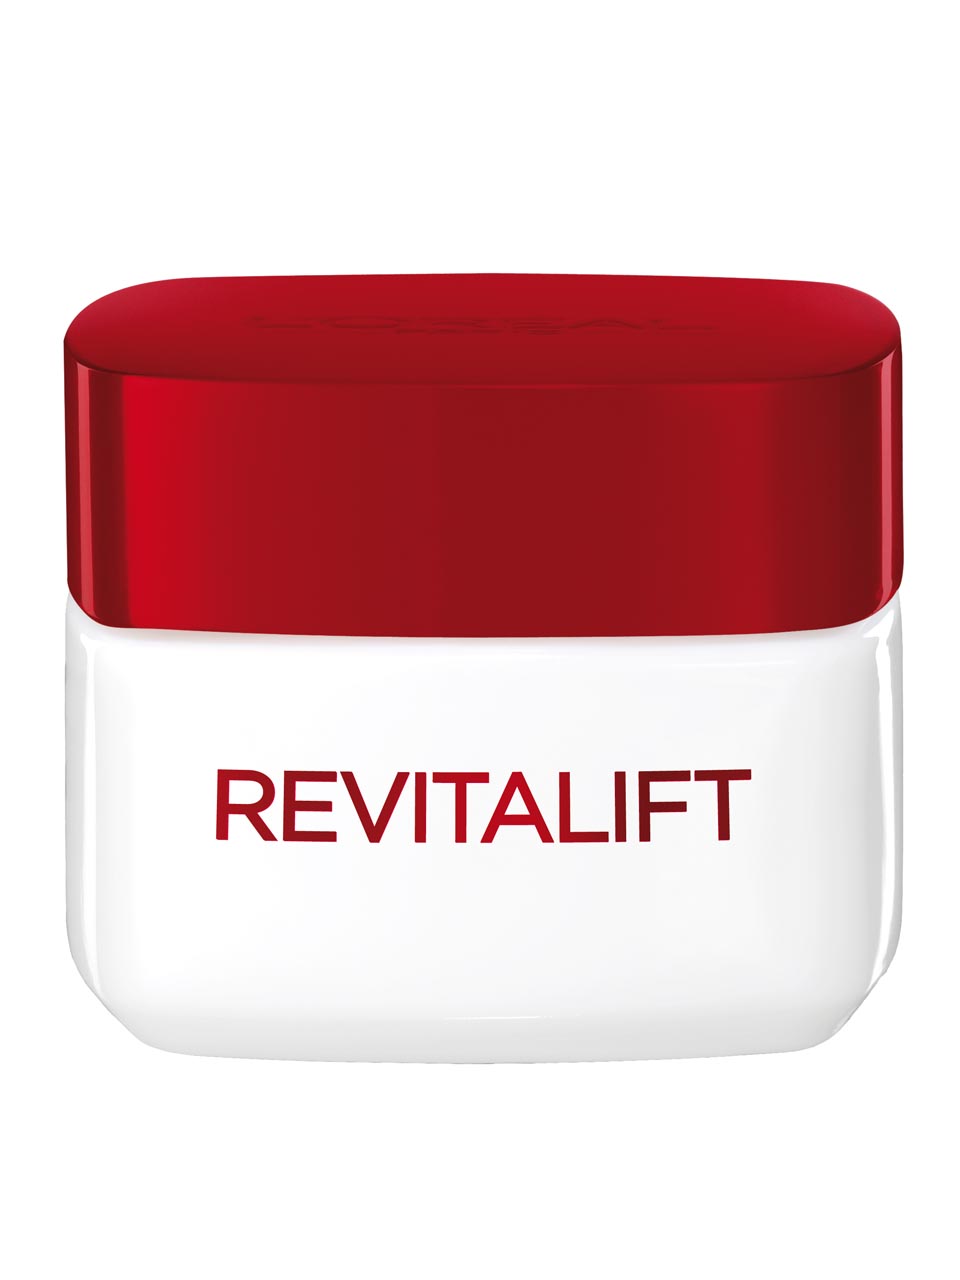 Revitalift Anti wrinkle and firming Day Cream null - onesize - 1